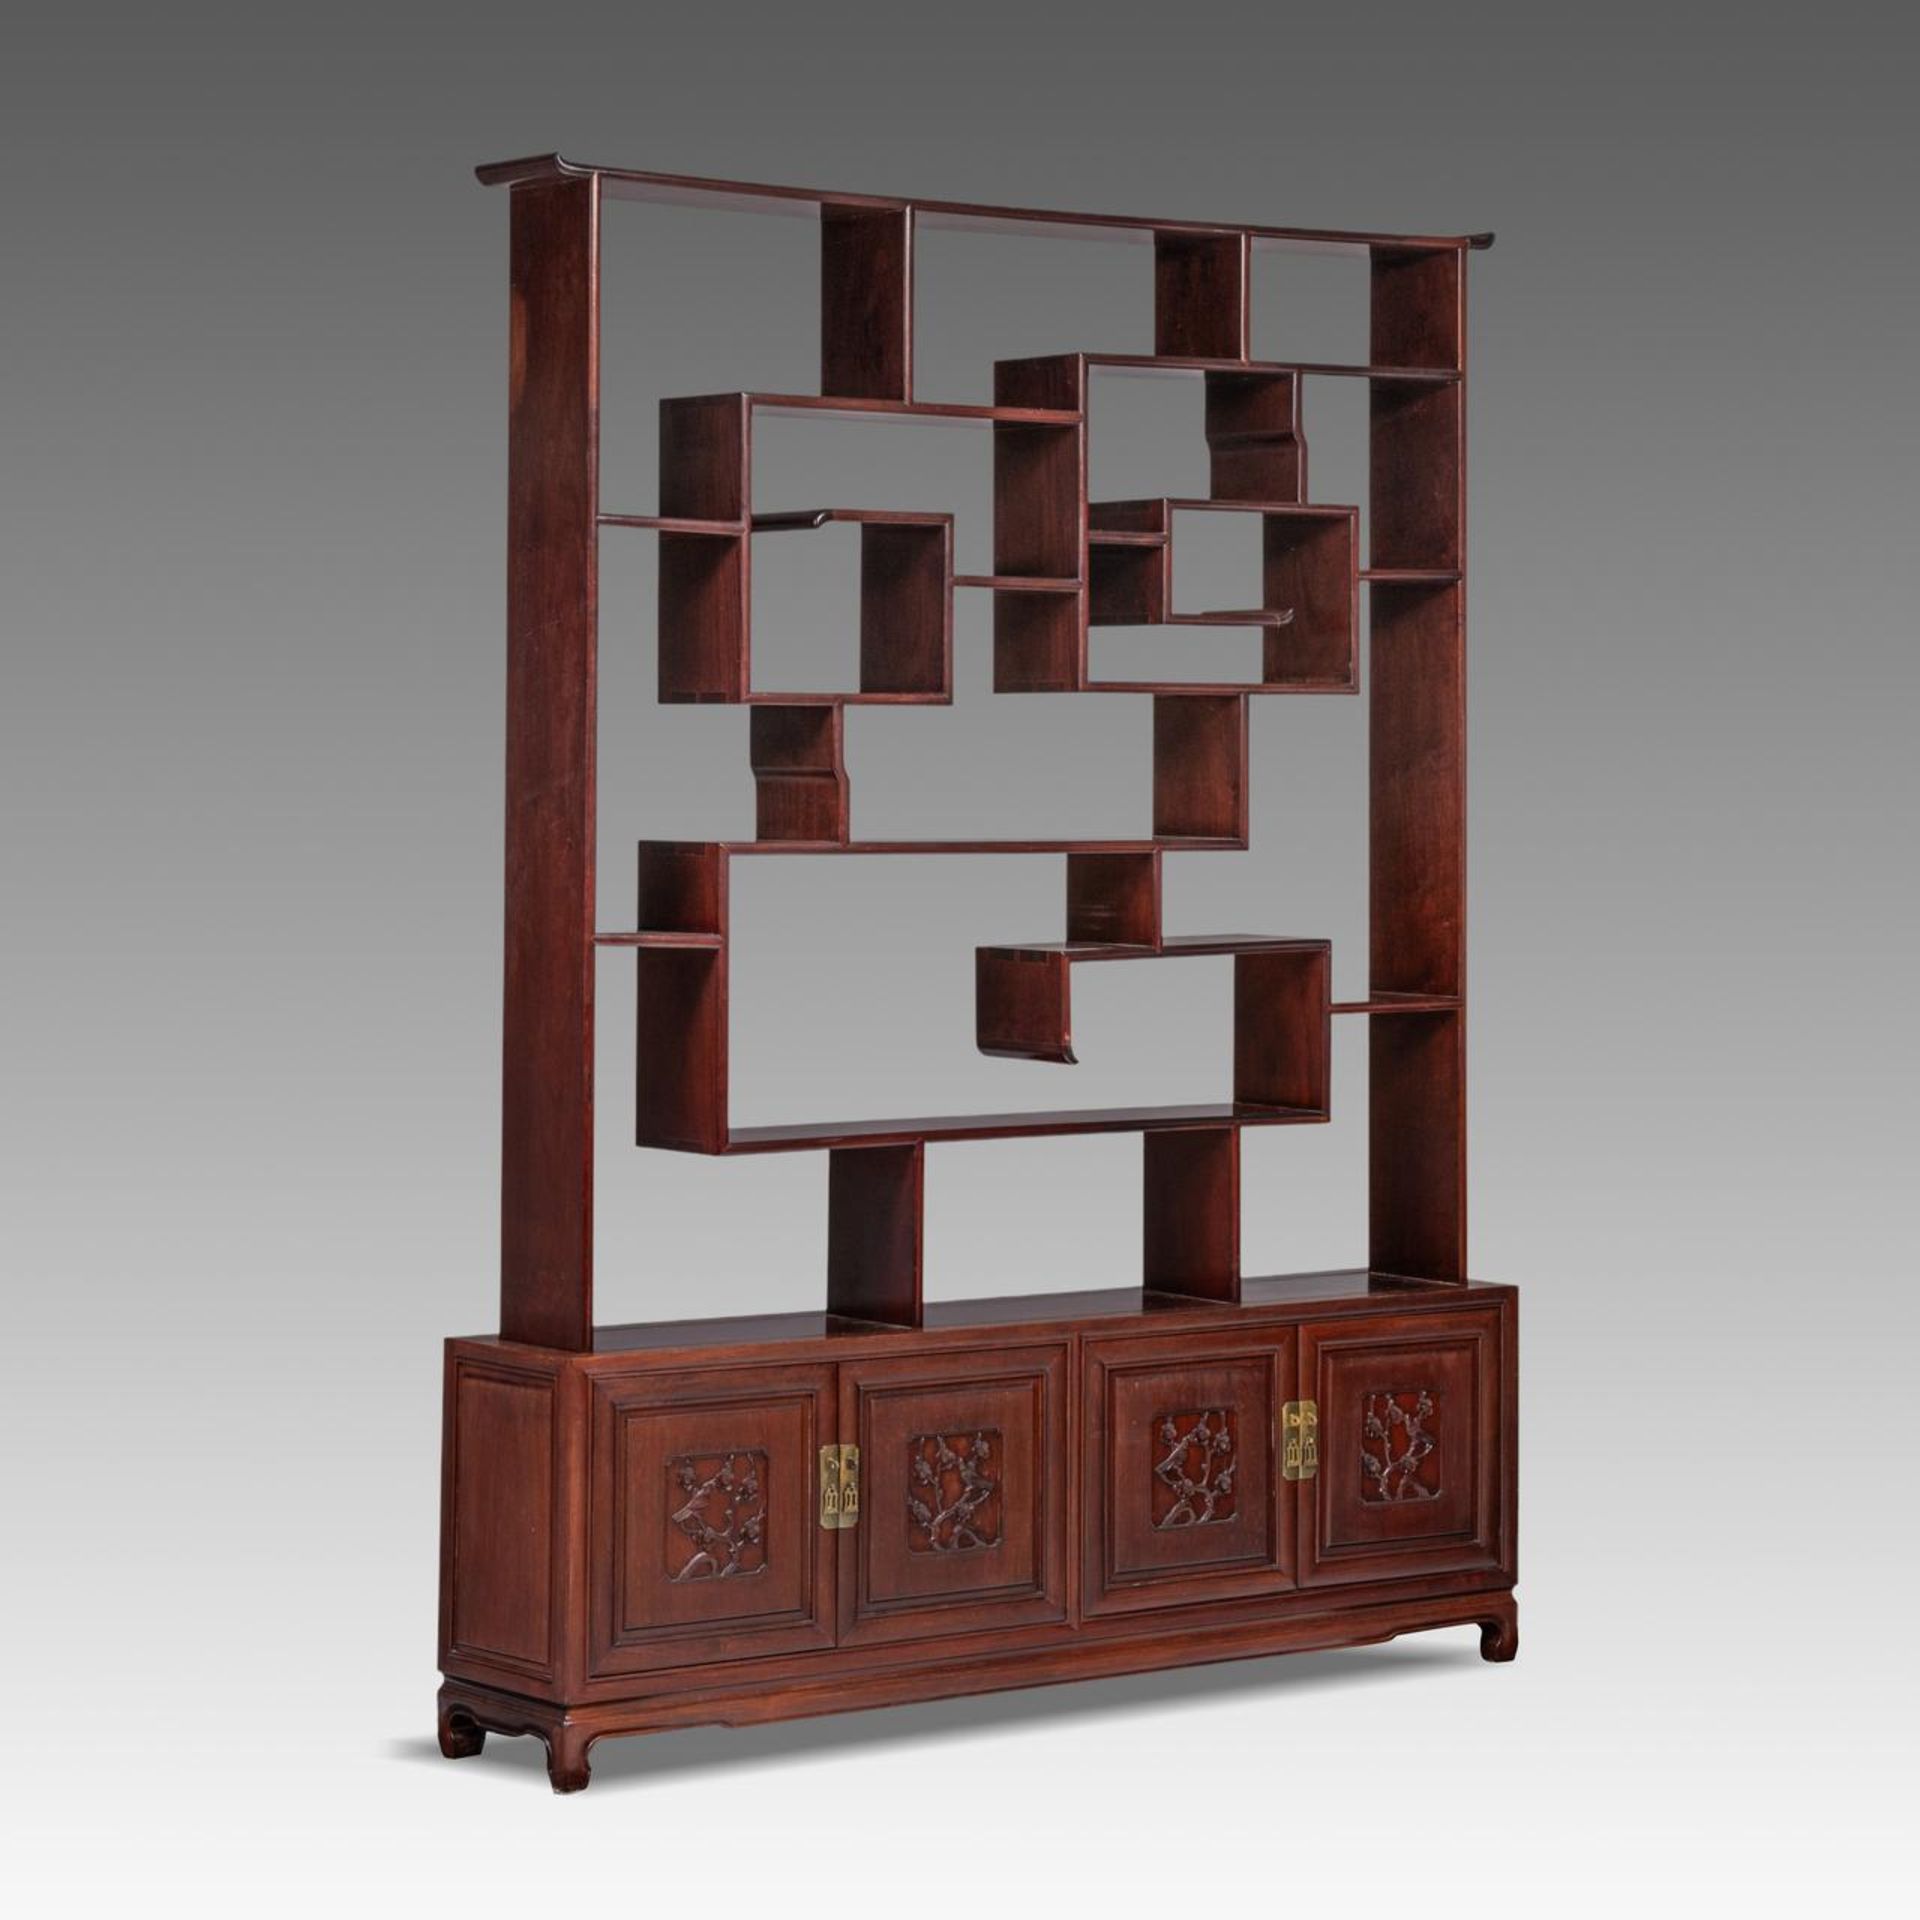 A Chinese hardwood display cabinet, 20thC, H 196 - W 151 - D 20 cm